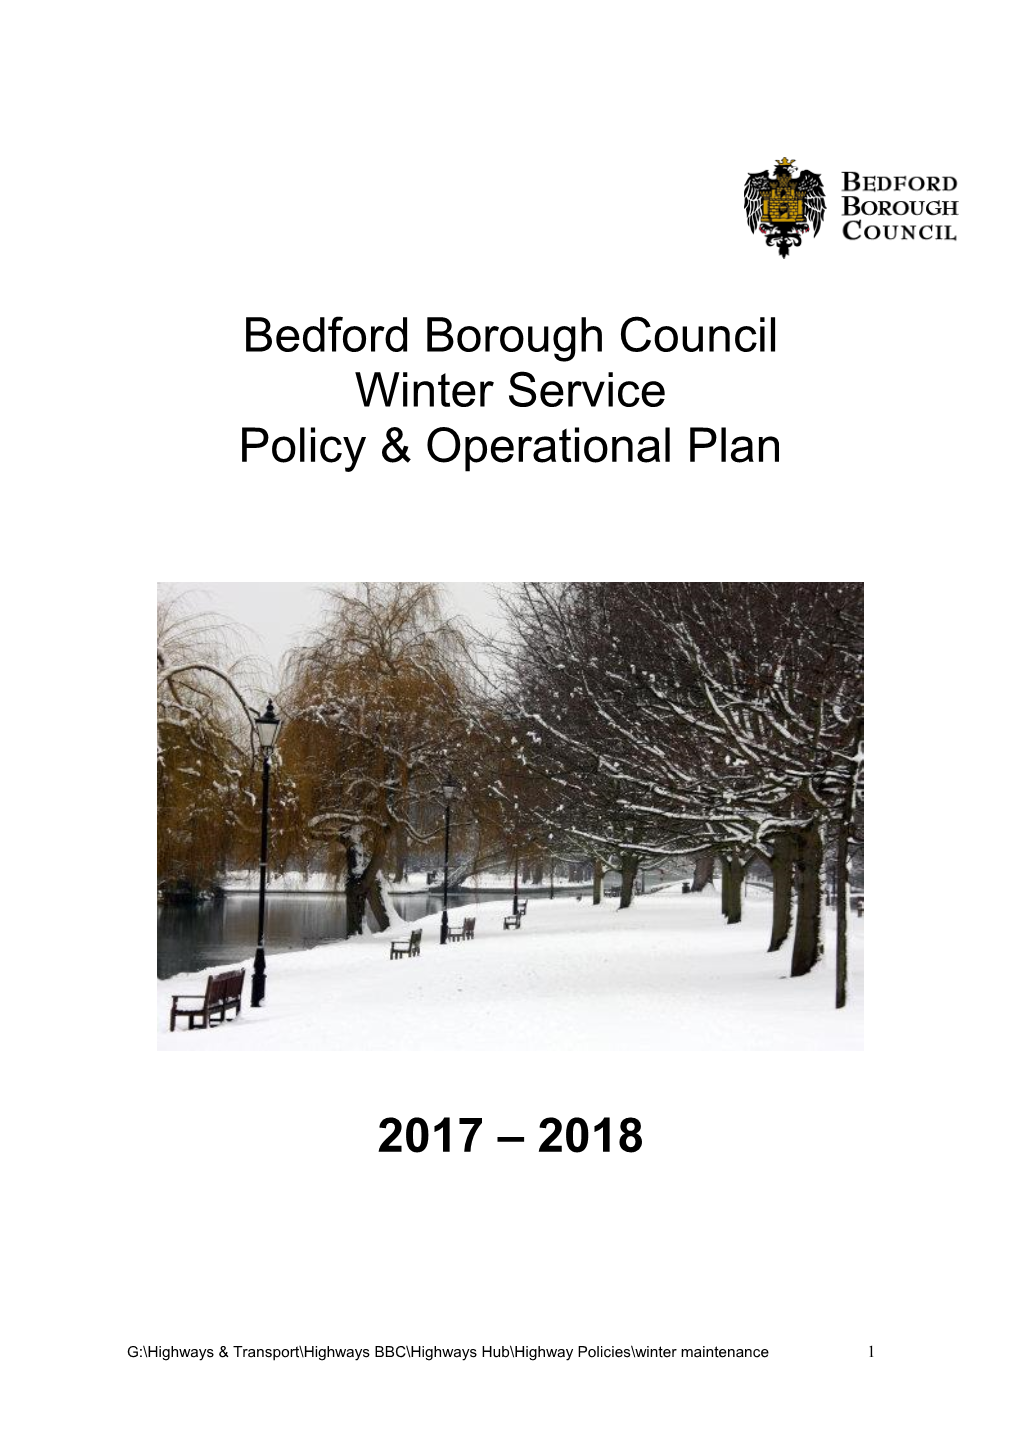 Bedford Borough Council Winter Service Policy & Operational Plan